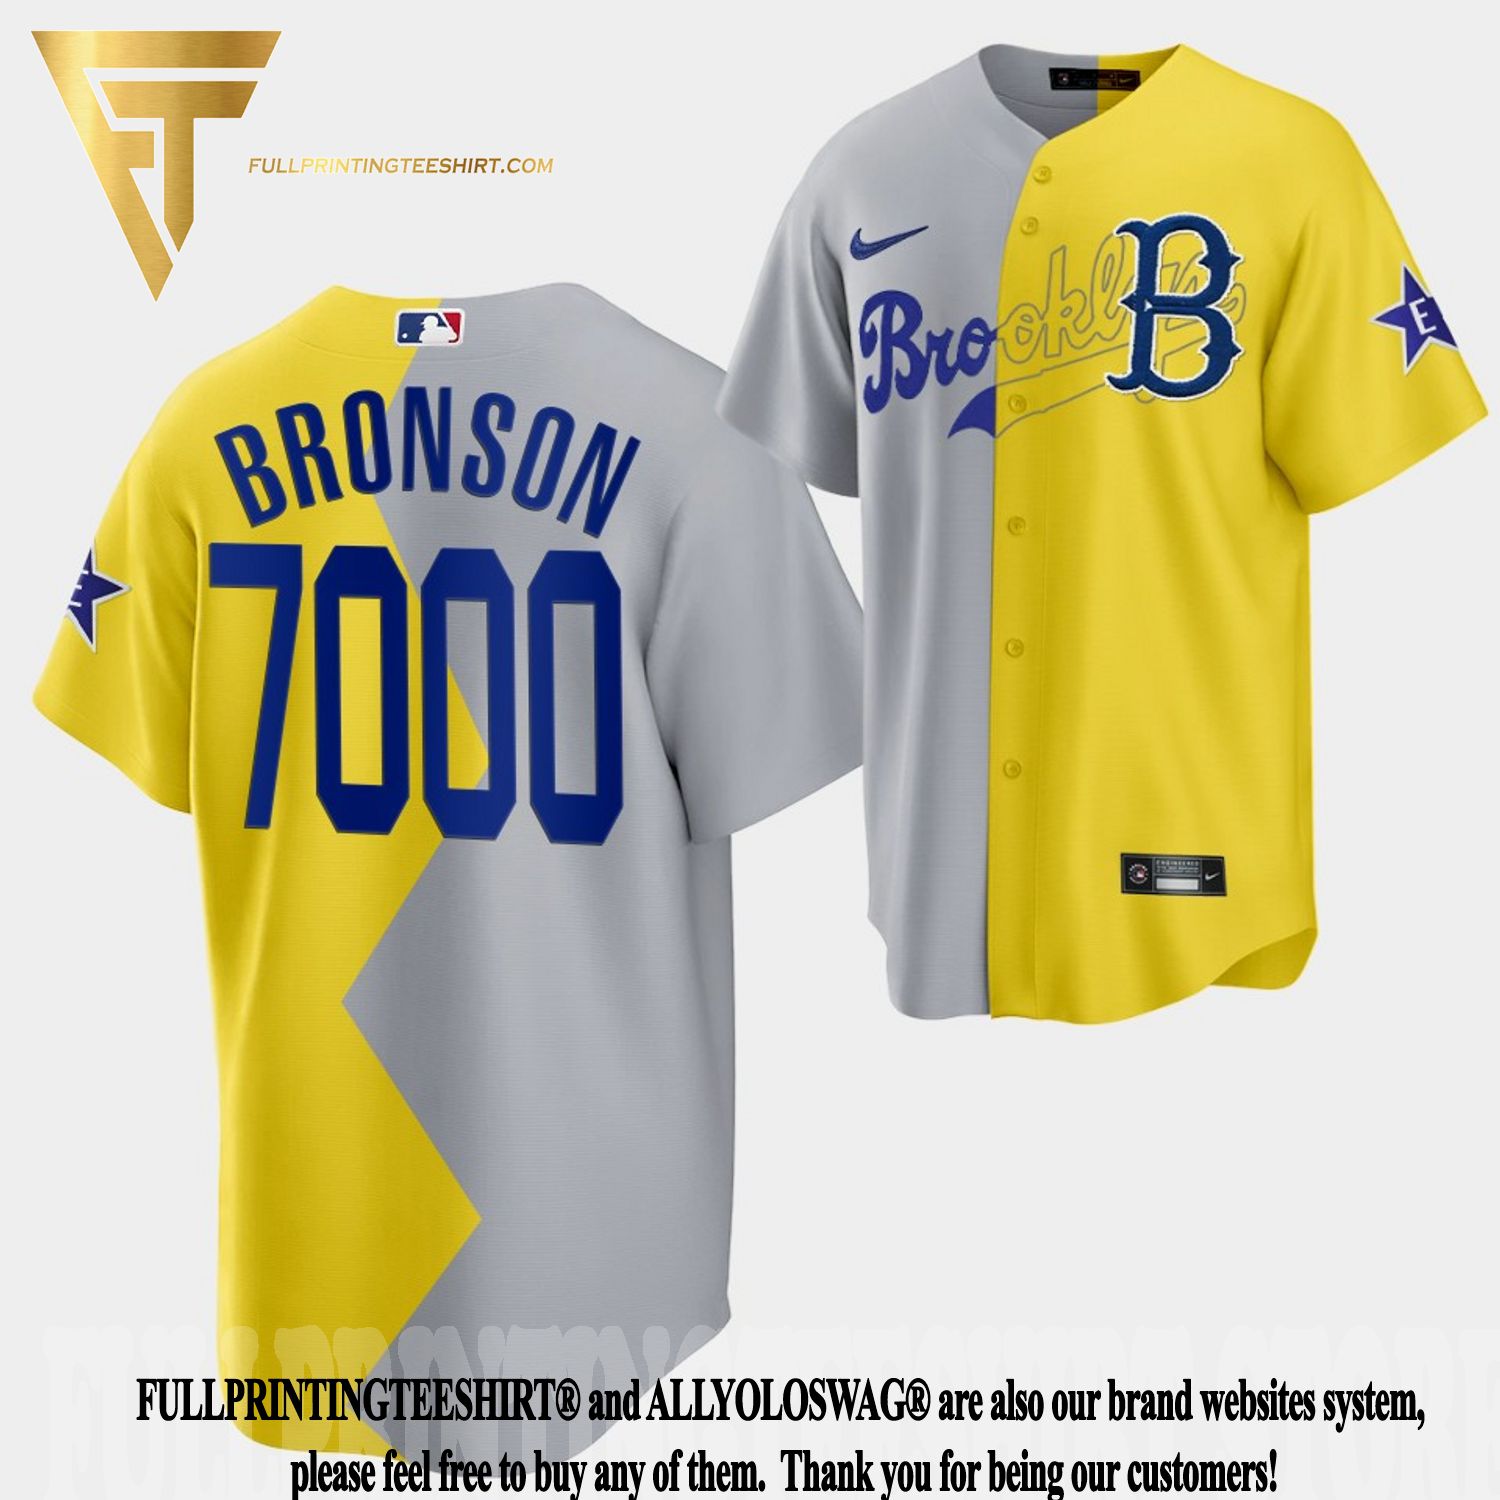 Top-selling Item] Brooklyn Dodgers Action Bronson 2022-23 All-Star  Celebrity Softball Game 7000 Gray Yellow Baklava 3D Unisex Jersey